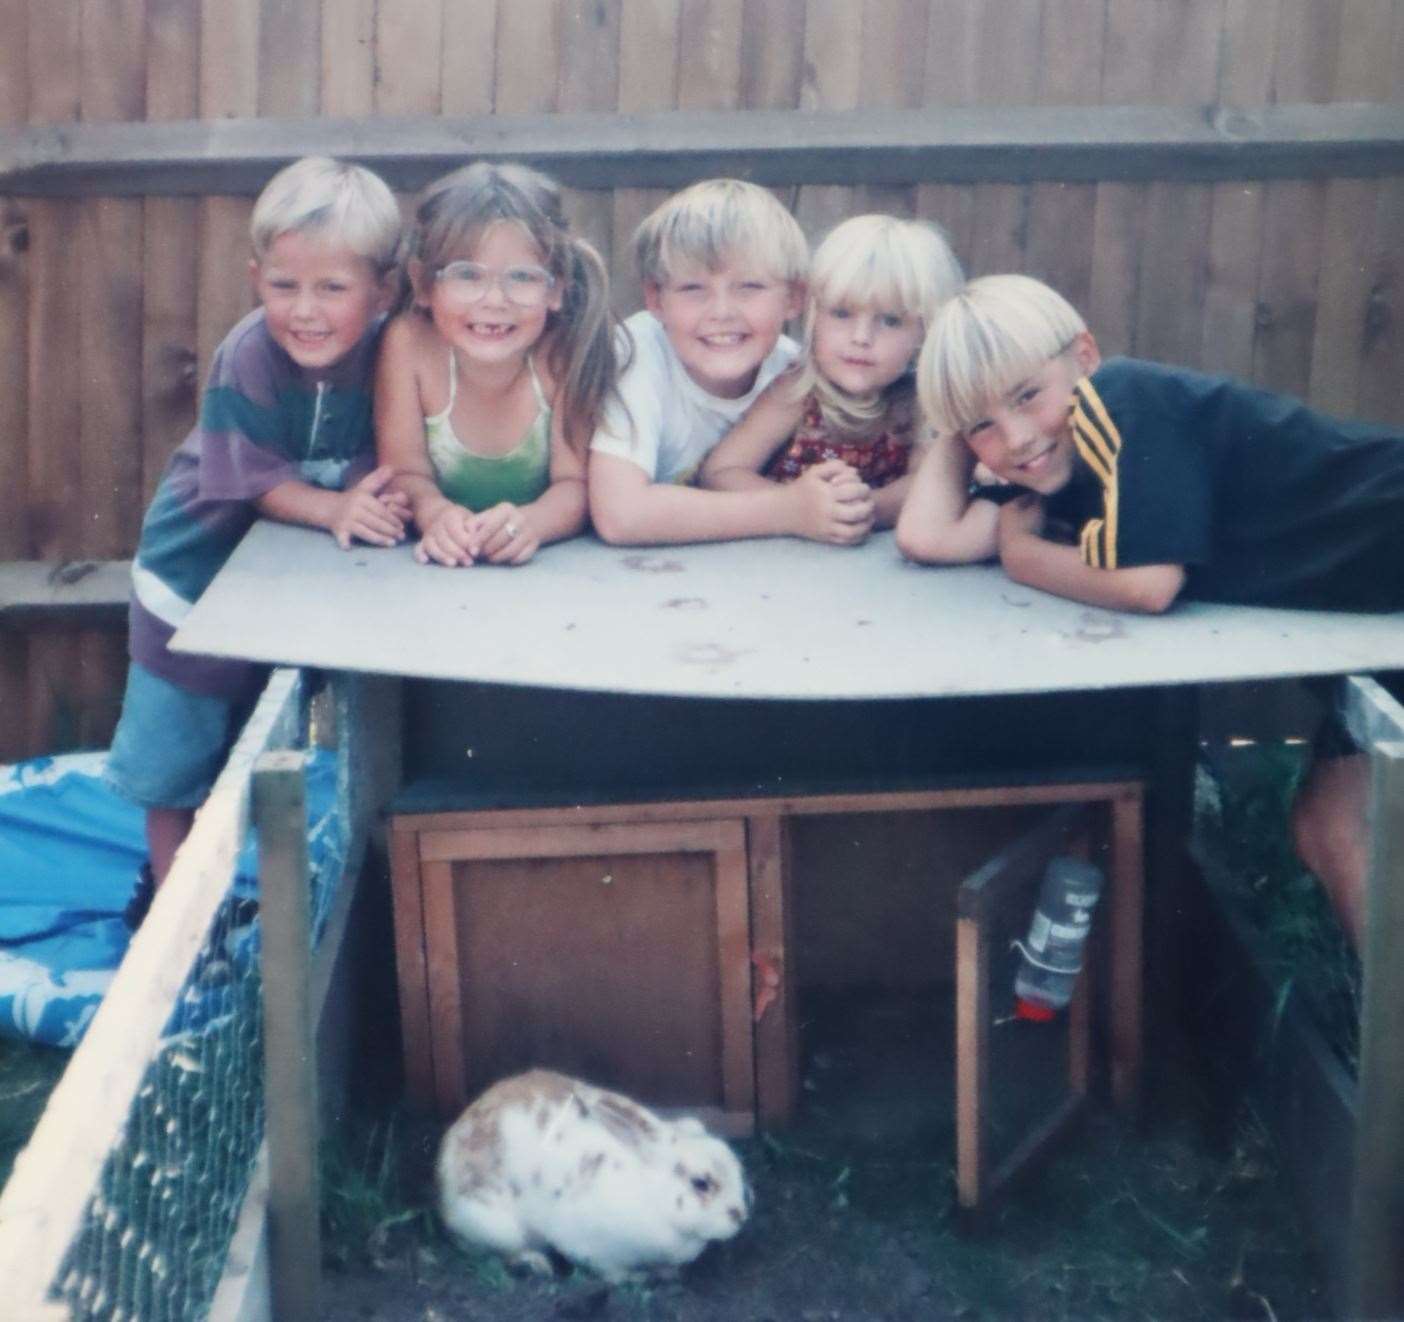 Luke Sullivan, centre, at his Aunty Diane's house with, from the left, his brother Chriony and cousins Amber, Alice and Ross with Thumper the rabbit